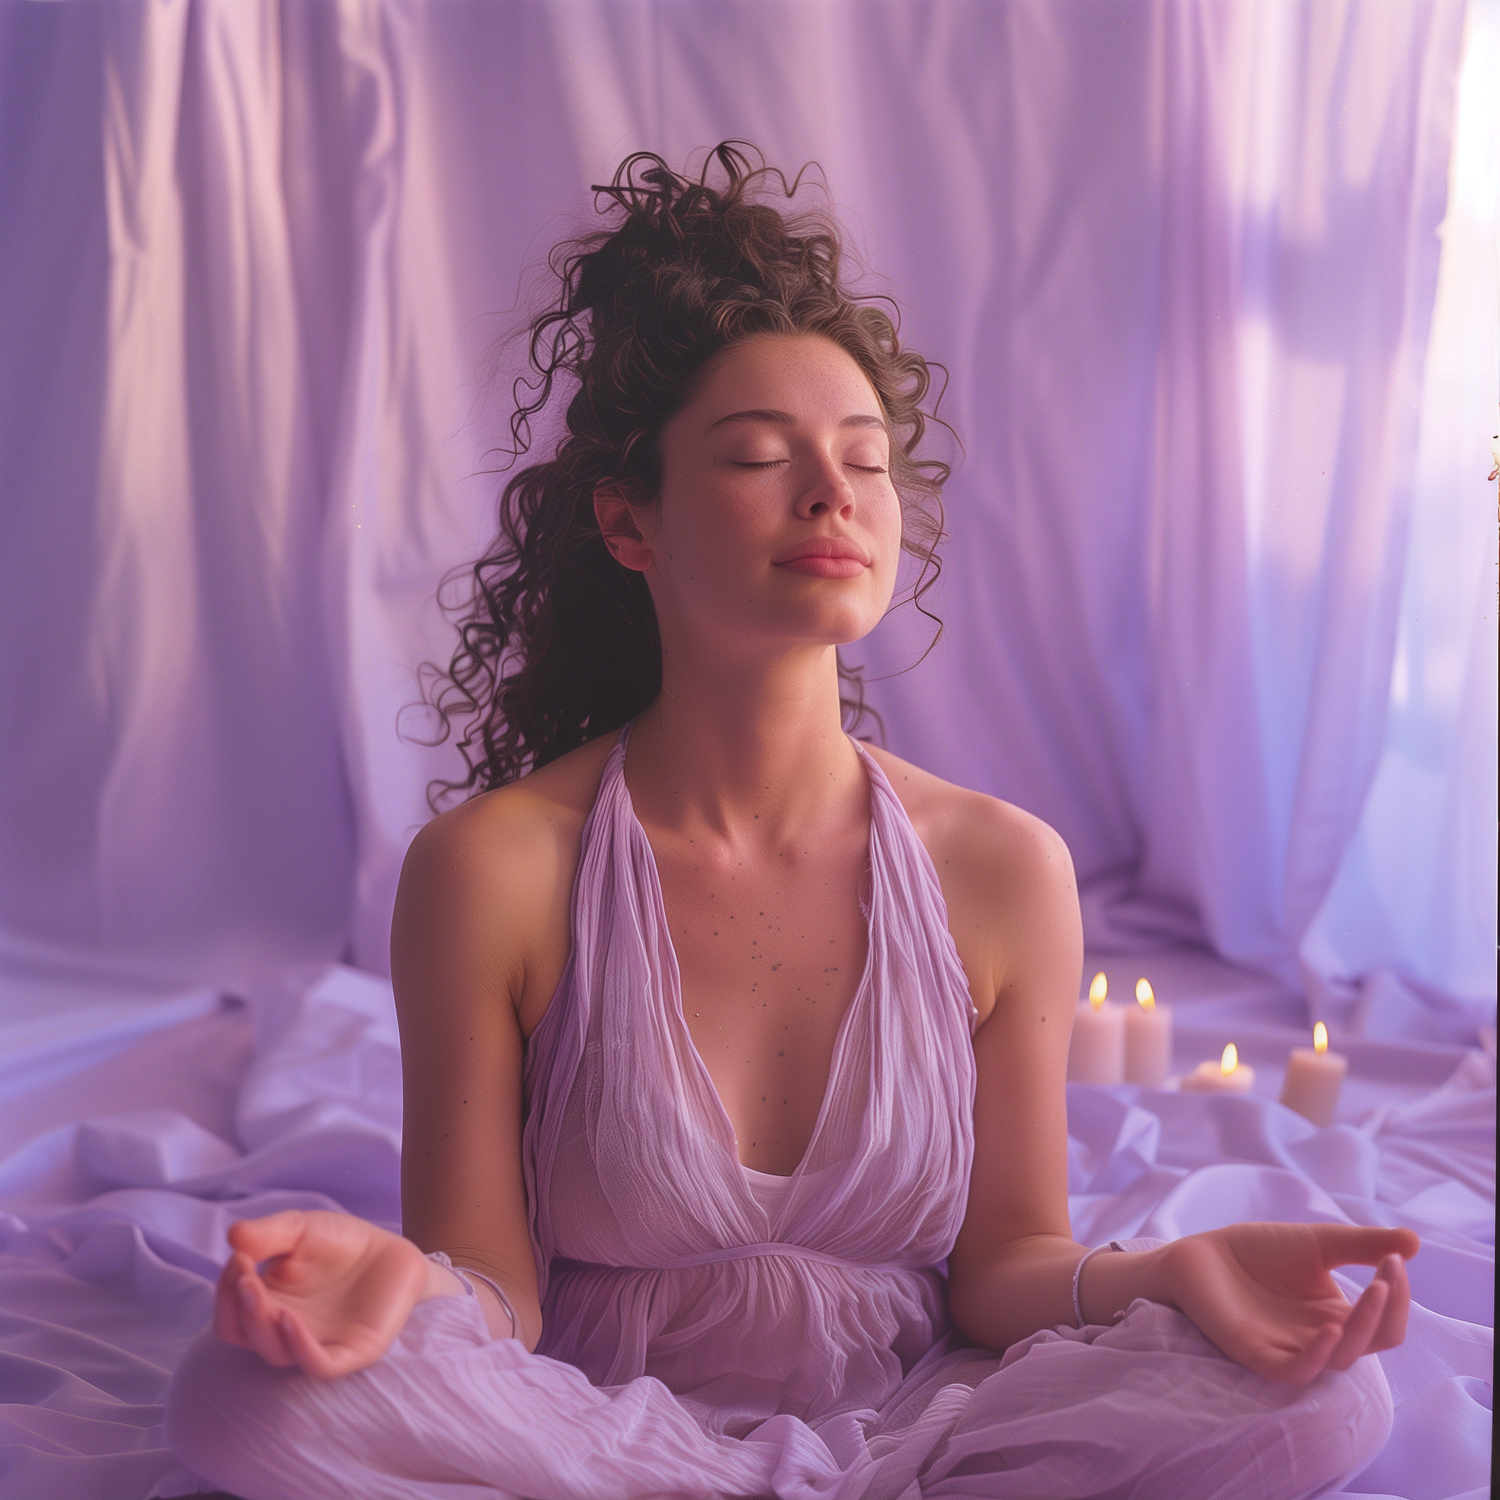 paraffin_bad_a_woman_relaxed_happy_meditating_home_spa